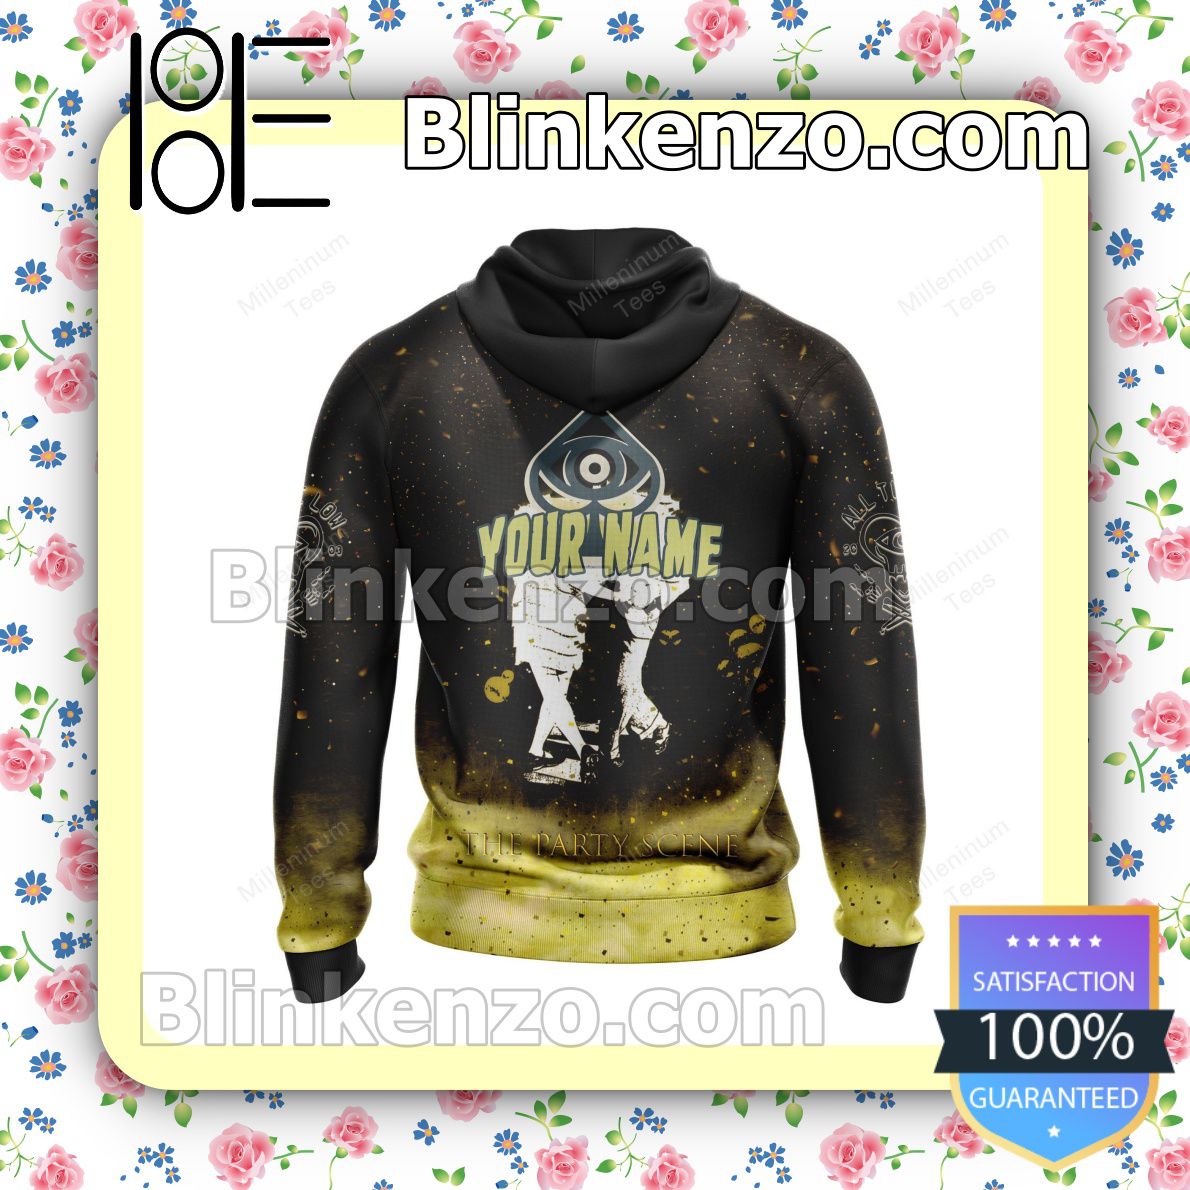 Personalized All Time Low The Party Scene Album Cover Hooded Sweatshirt